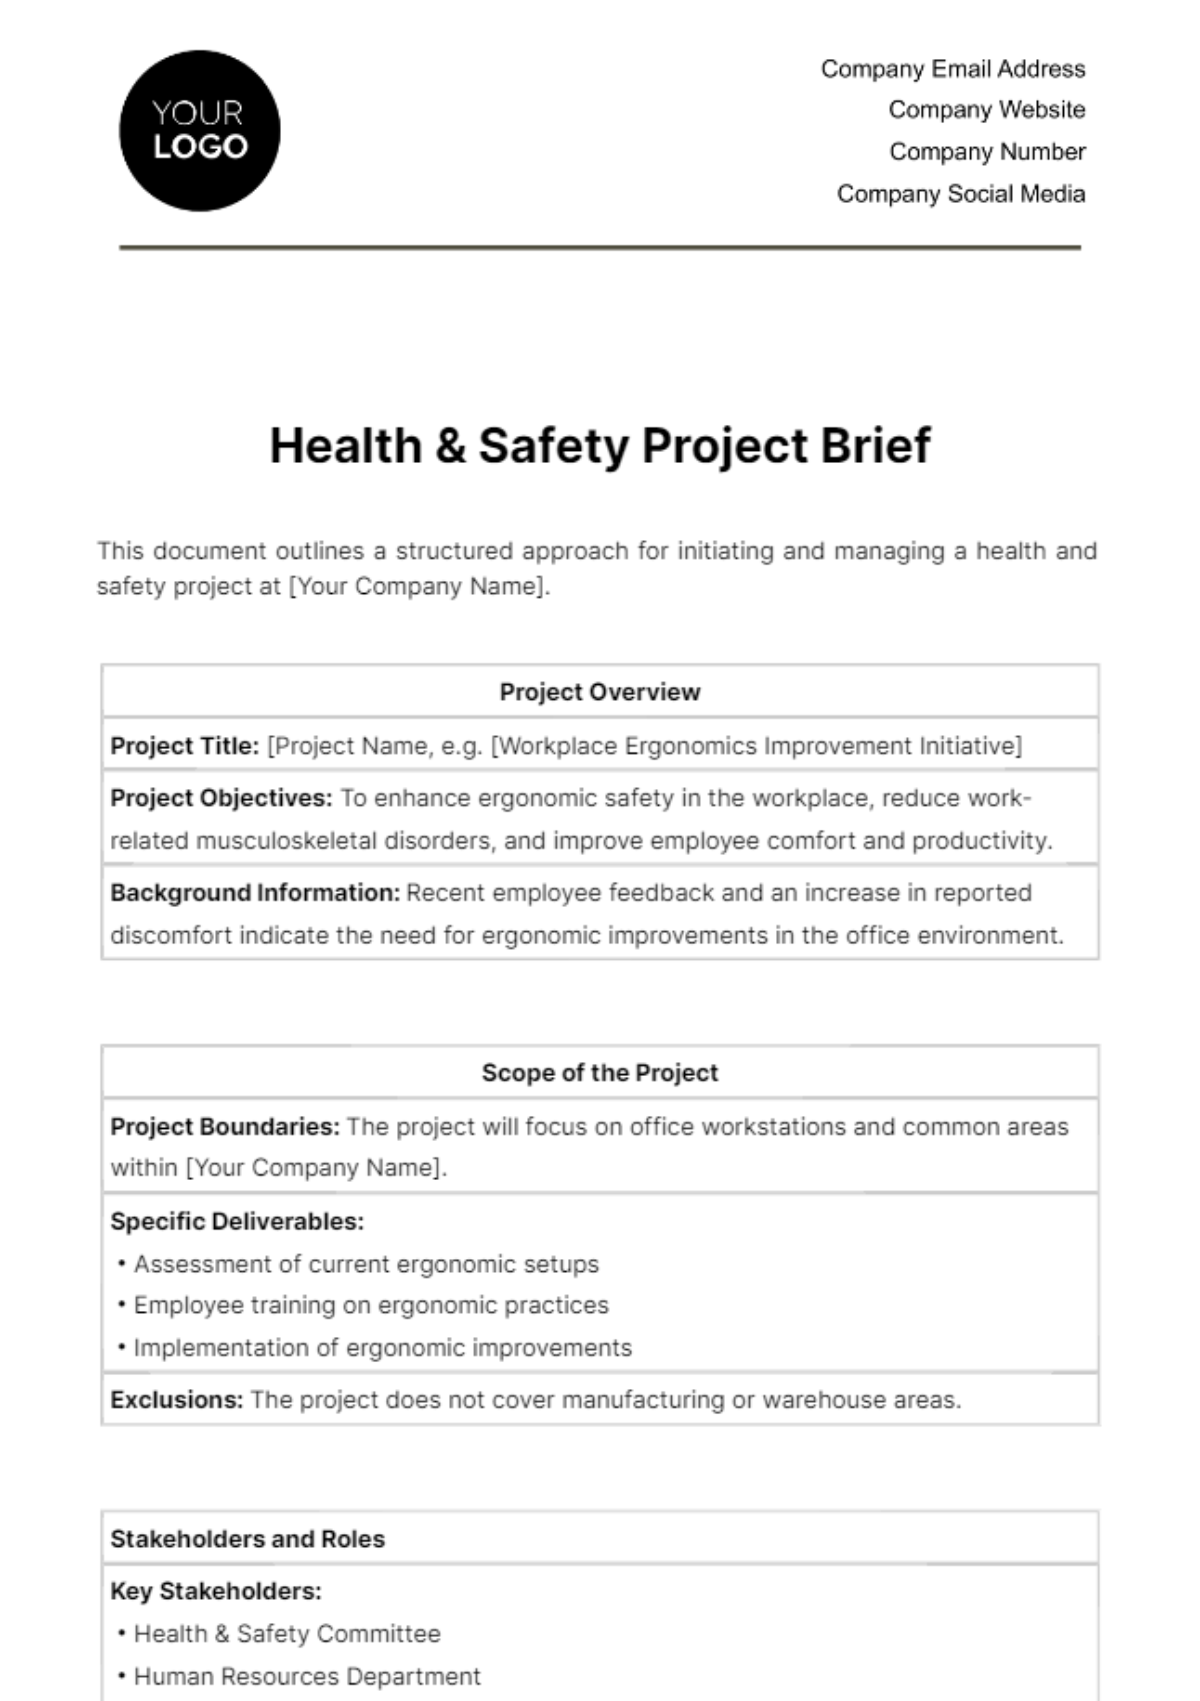 Free Health & Safety Project Brief Template